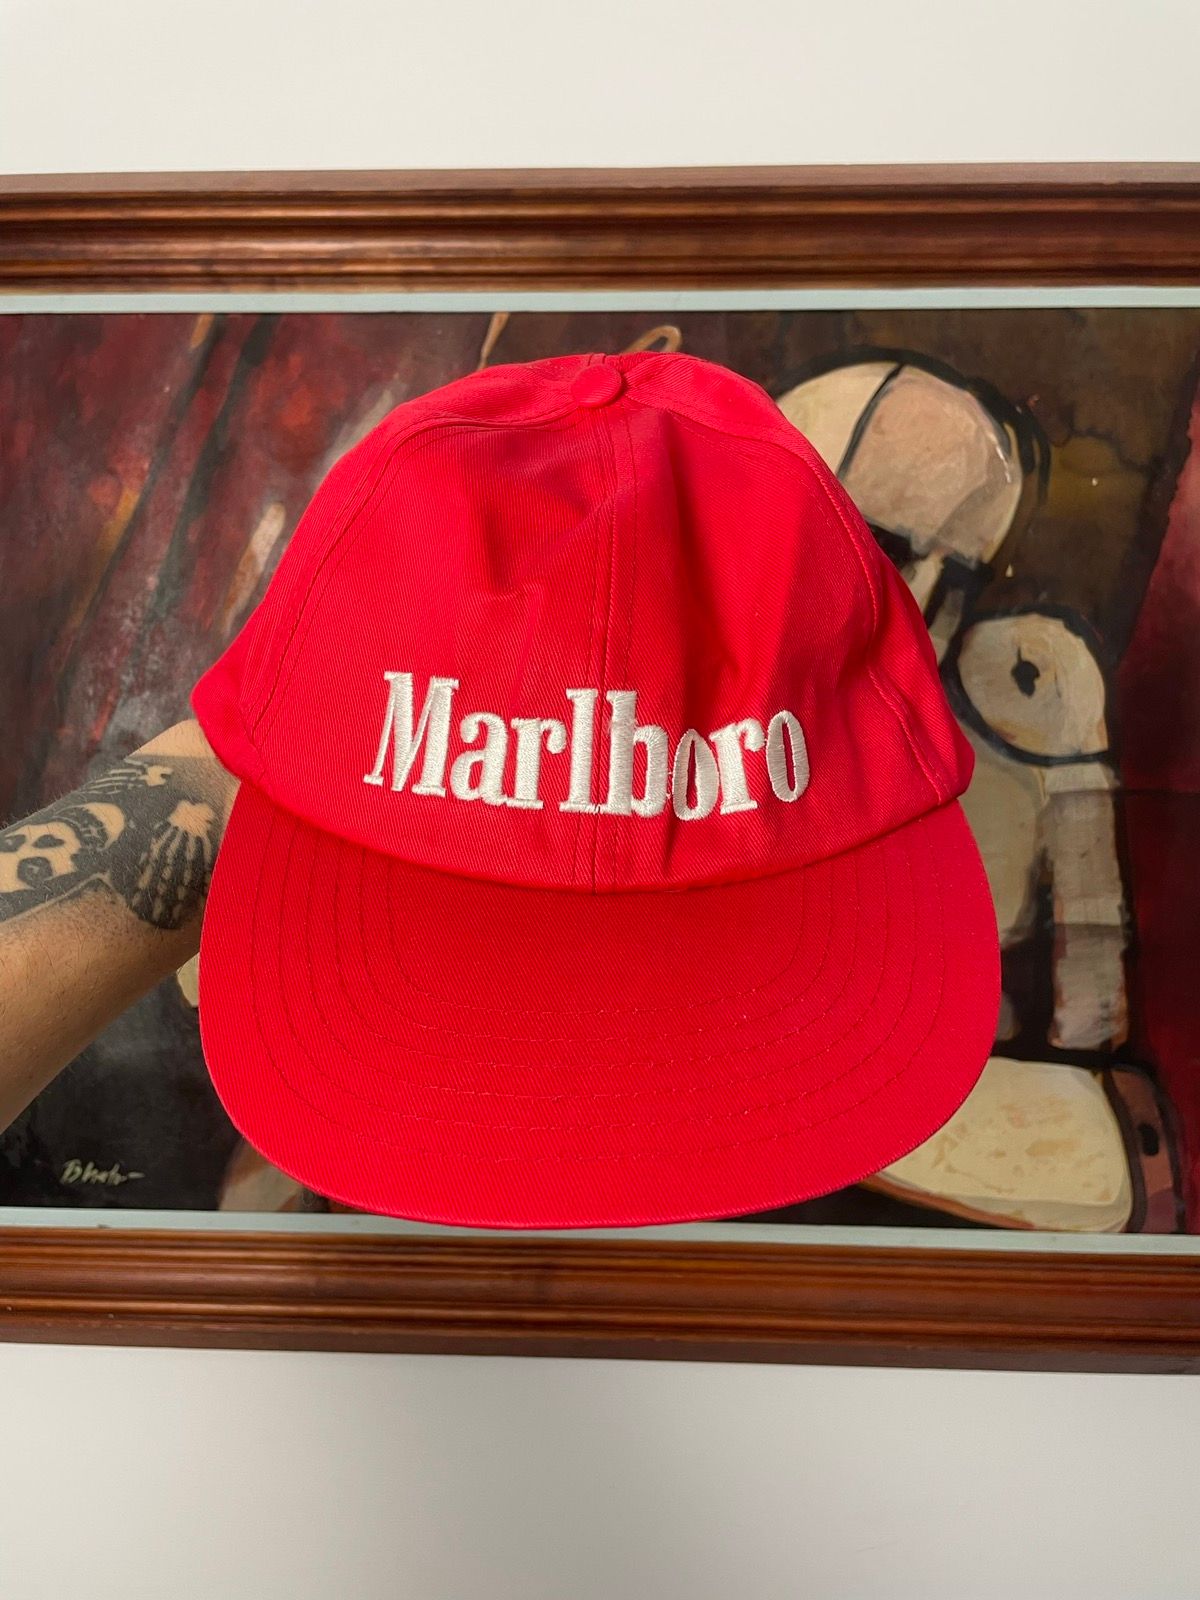 Pre-owned Hat X Marlboro Vintage Classic Logo Hat Snapback Cap Hype In Red